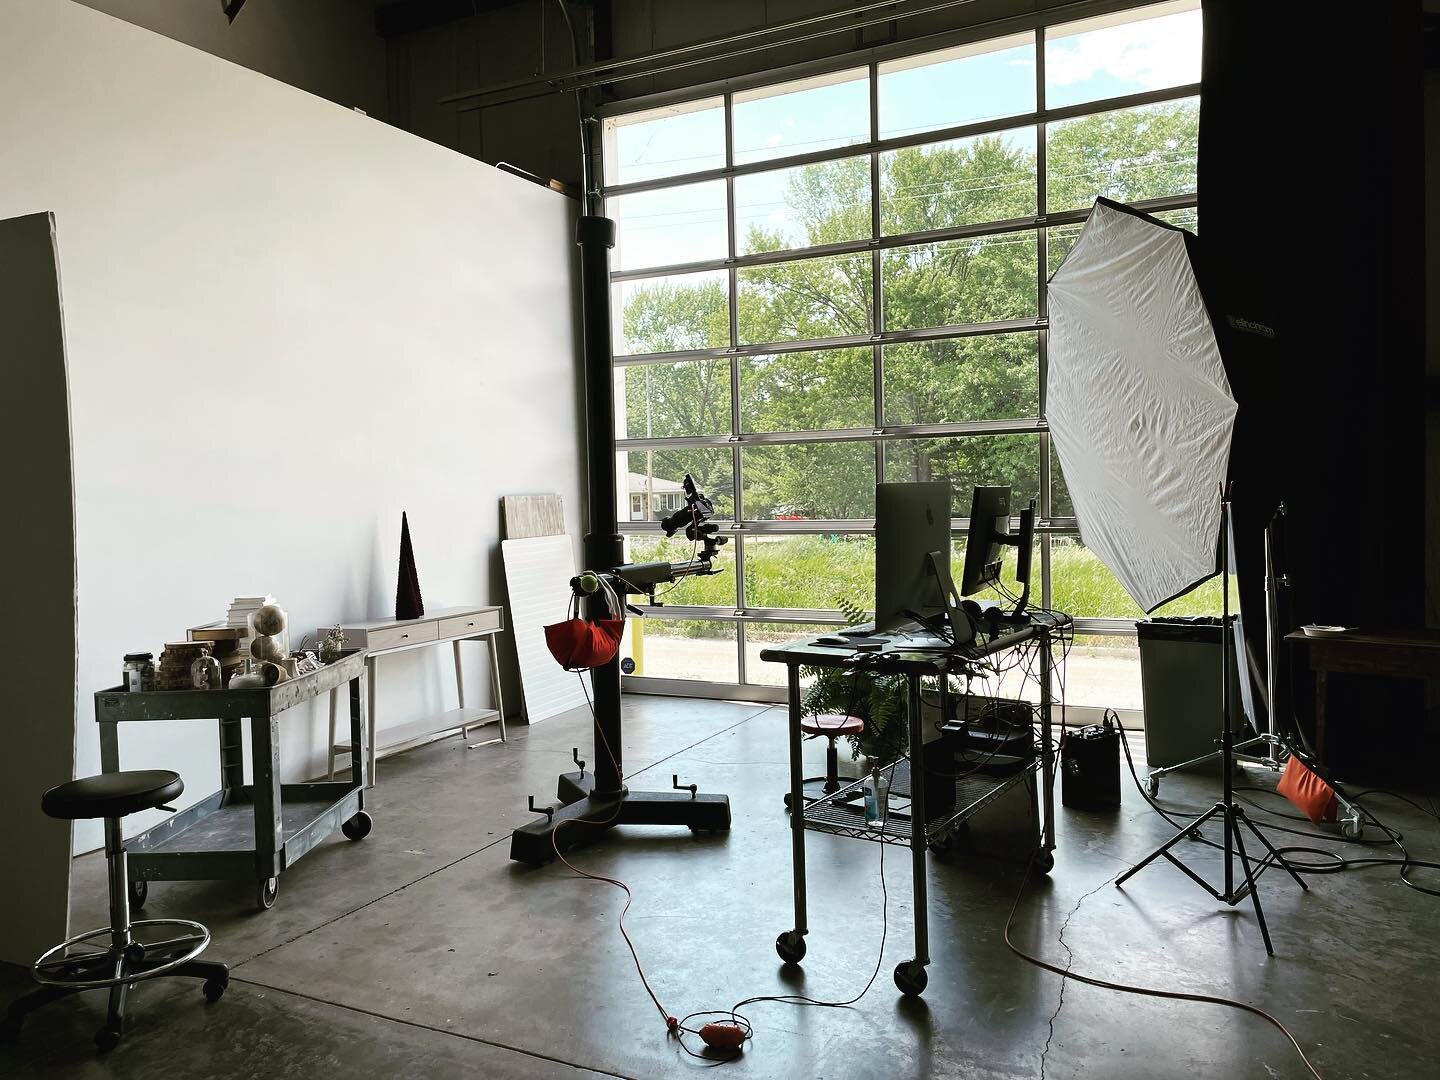 #naturallightphotography kind of day in Studio A.